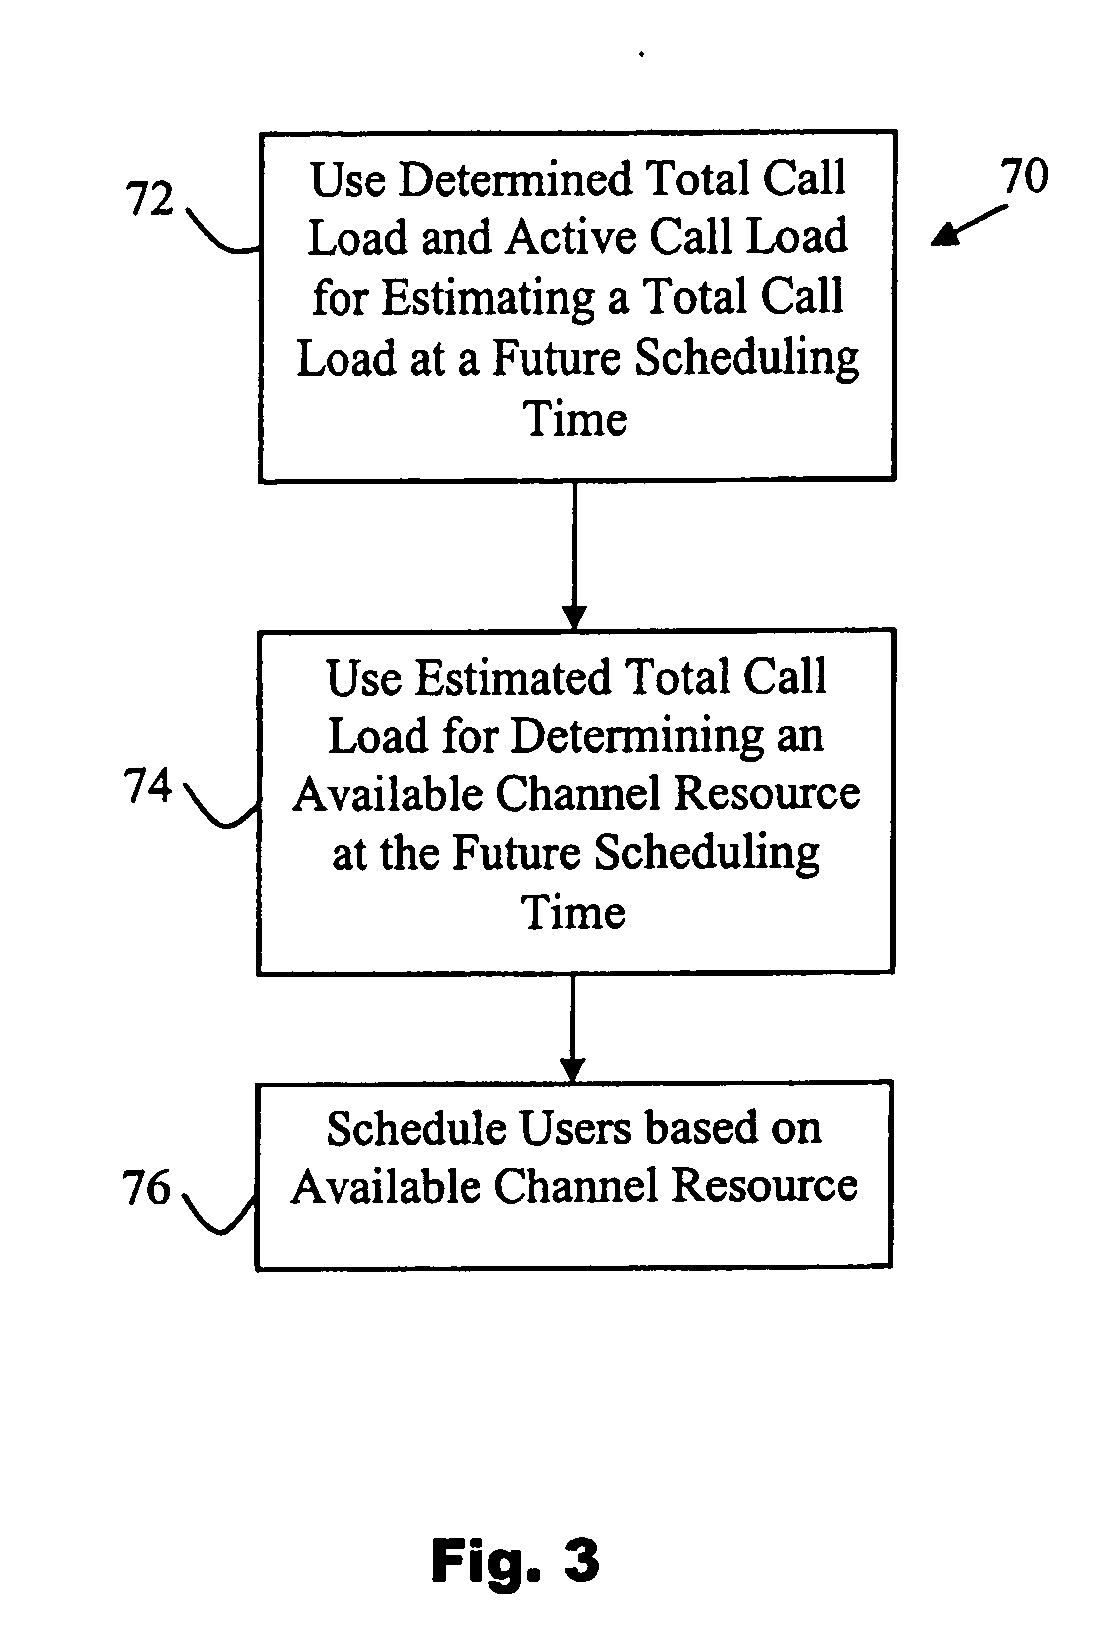 Scheduling mobile users based on cell load